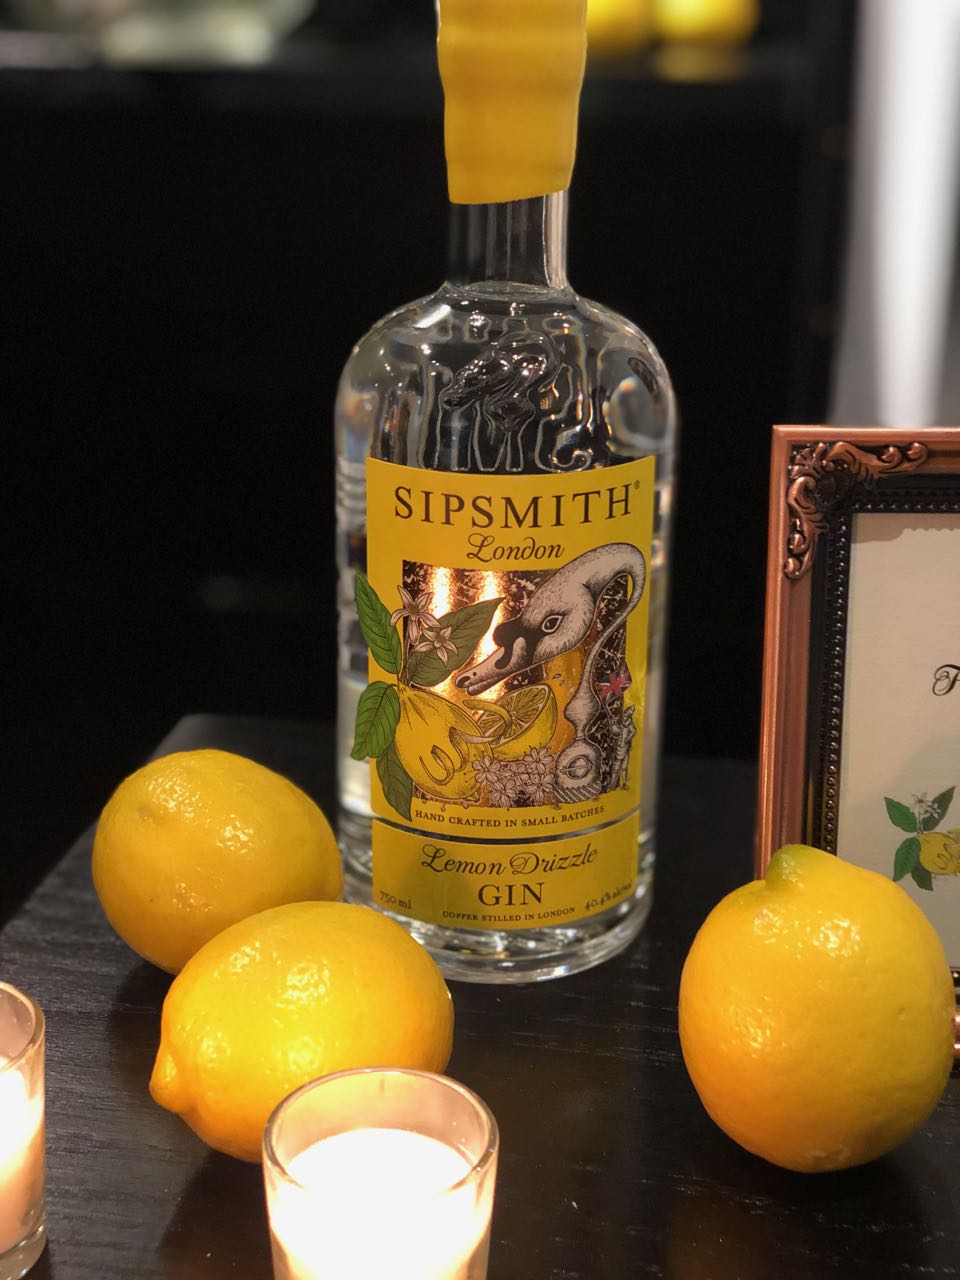 Sipsmith’s Lemon Drizzle Gin Is The Latest It Drink To Get